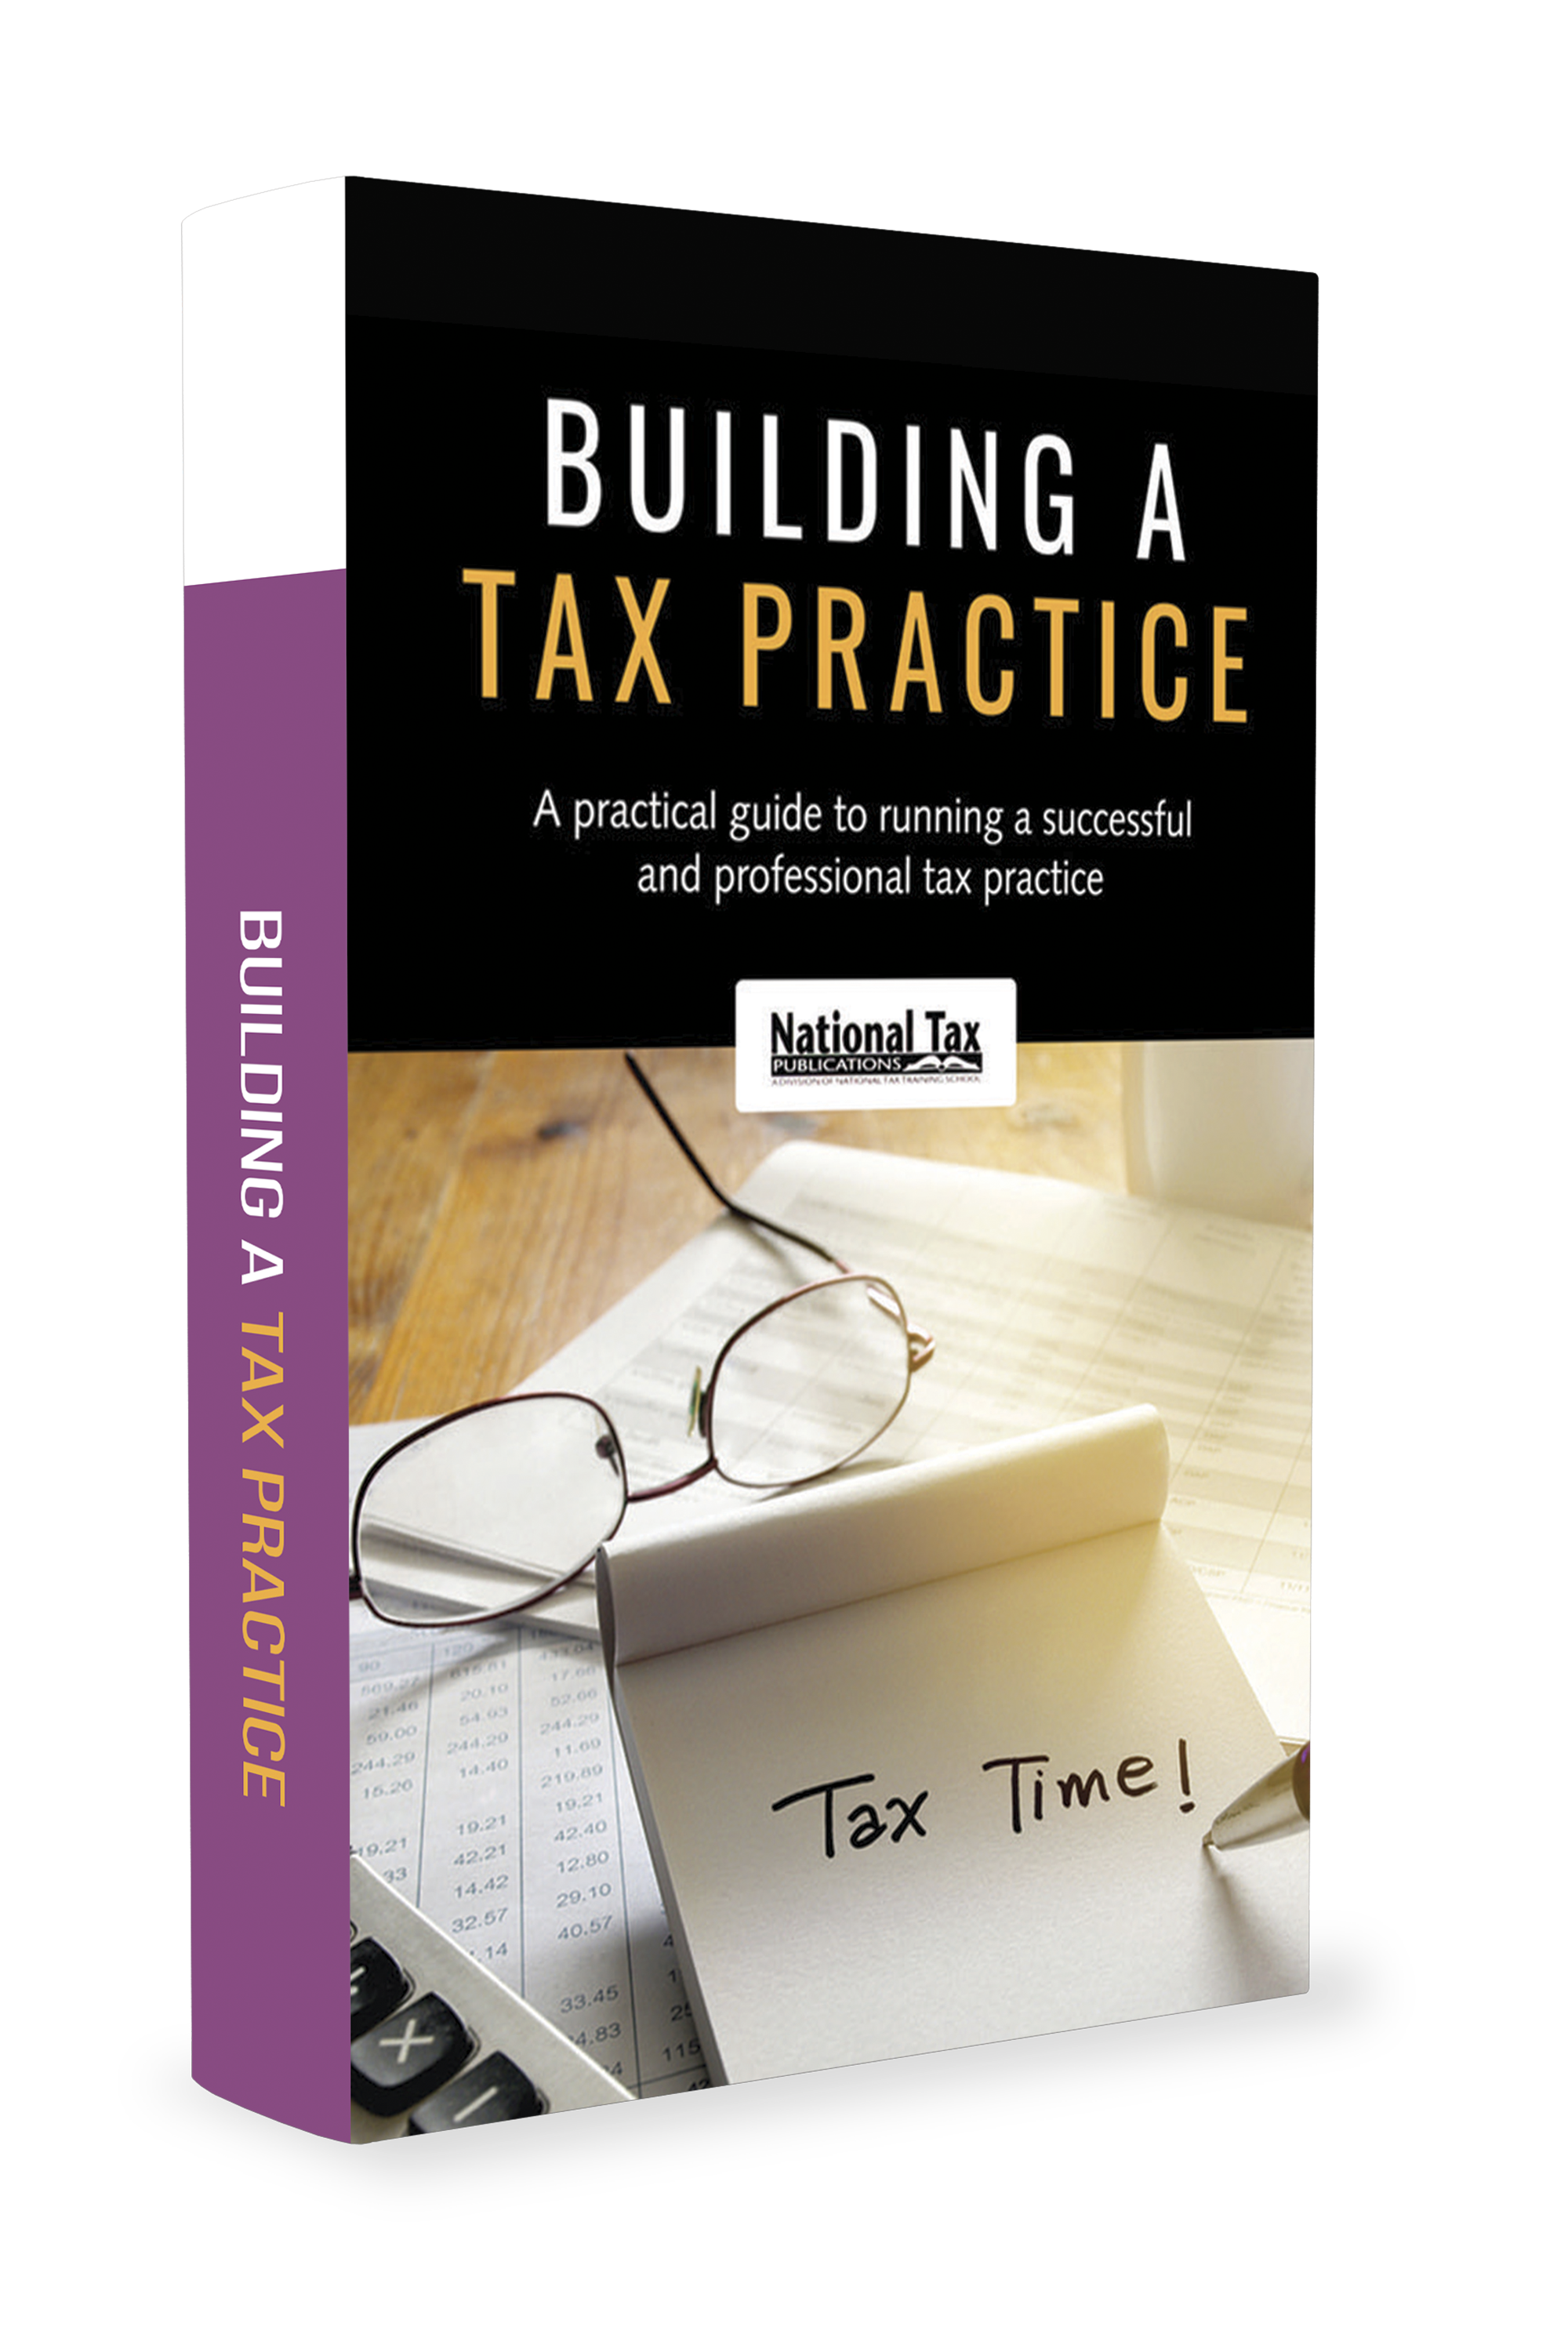 Building a Tax Practice (2017) - #3725 